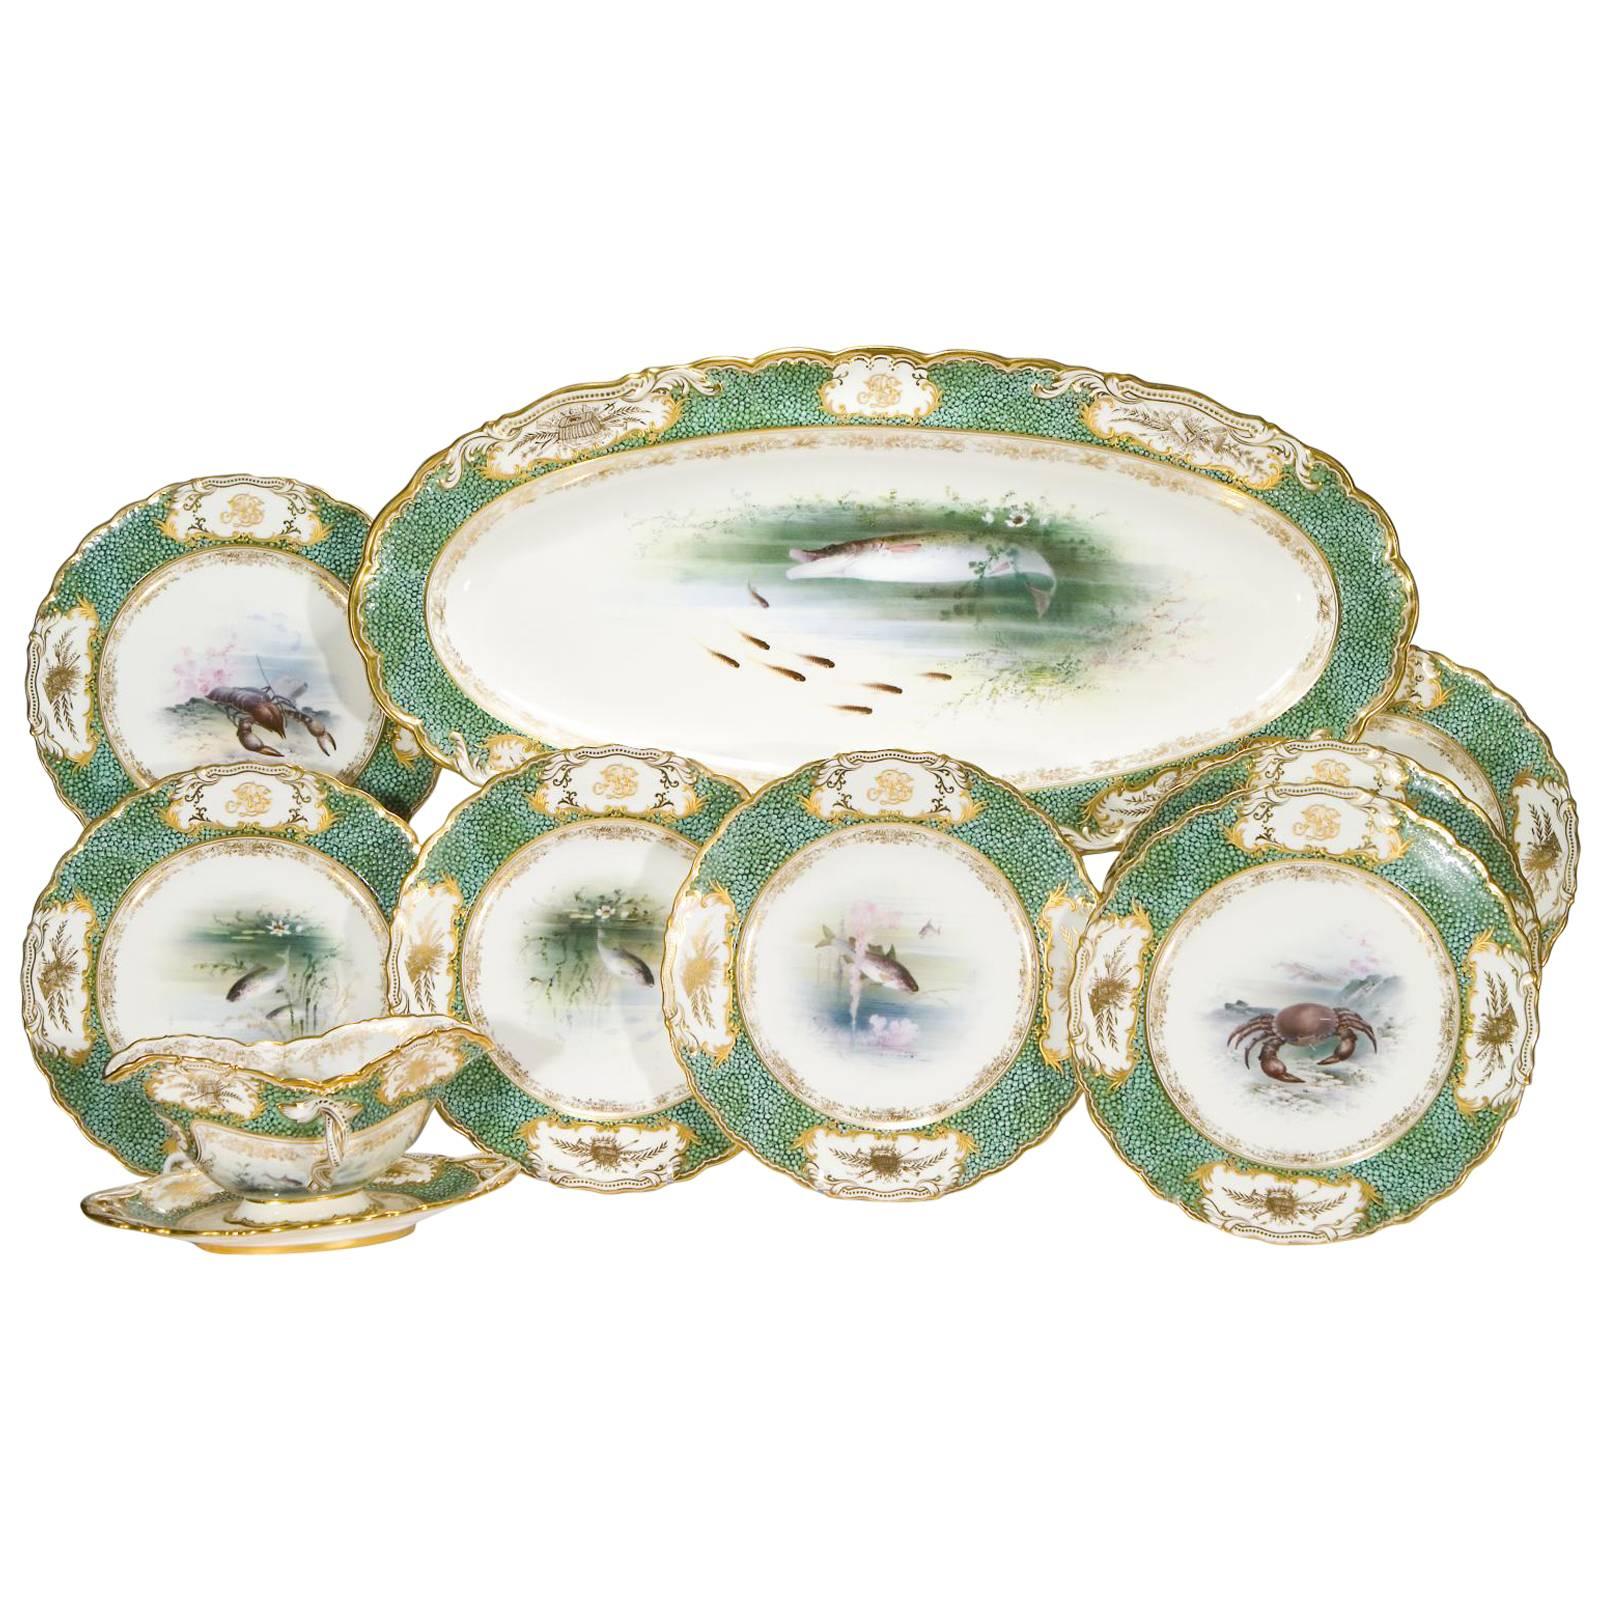 18-Piece Coalport Hand-Painted Artist Signed Fish Service with "Shagreen" Border